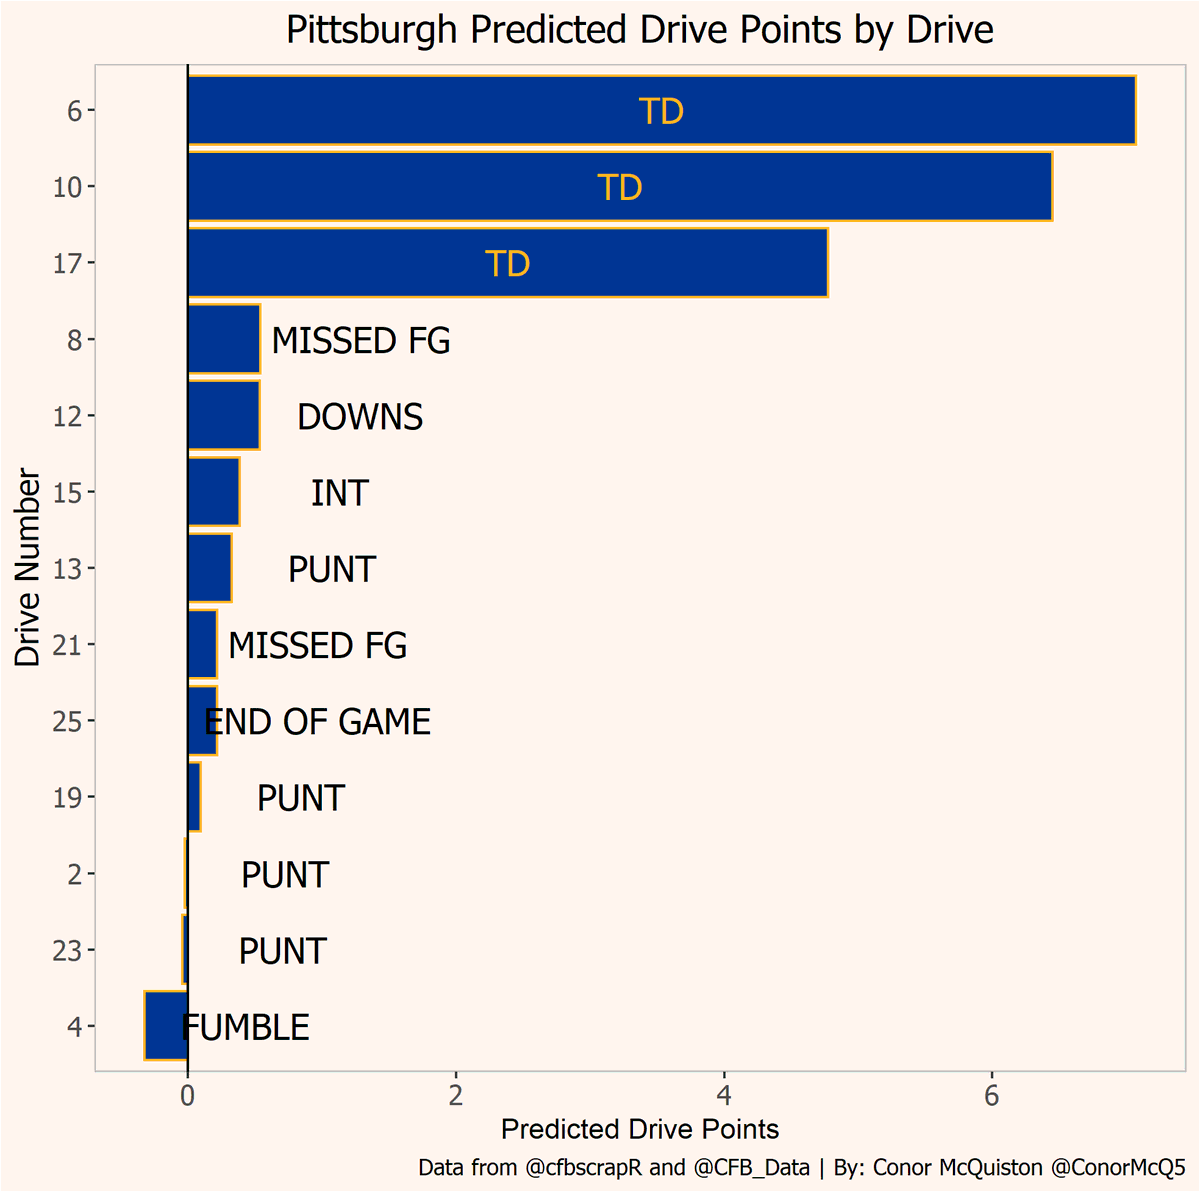 So what can it tell us in a given game?Overall it lets us look at what were the most successful drives were, so we can identify the spikes in play for a team. Additionally It lets us identify drives where teams should have done better or worse (Cuse Drive 5, Pitt Drive 17)